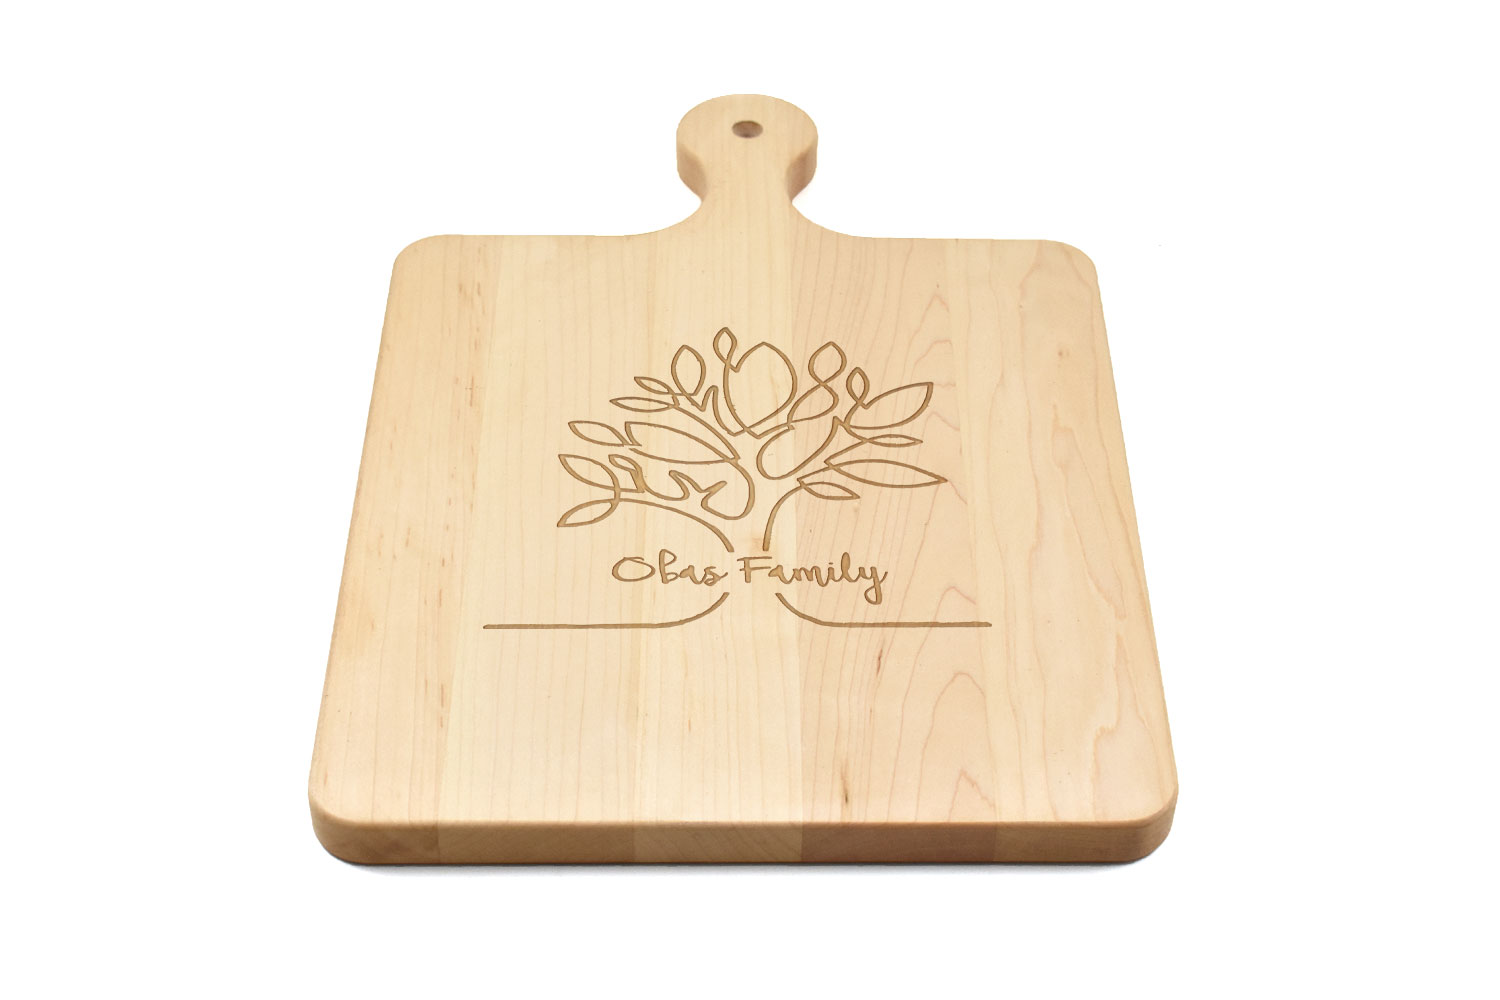 Maple Wood Cutting Board with Rounded Handle, Custom Engraved, Chopping Board, Presentation Board, Made in Canada